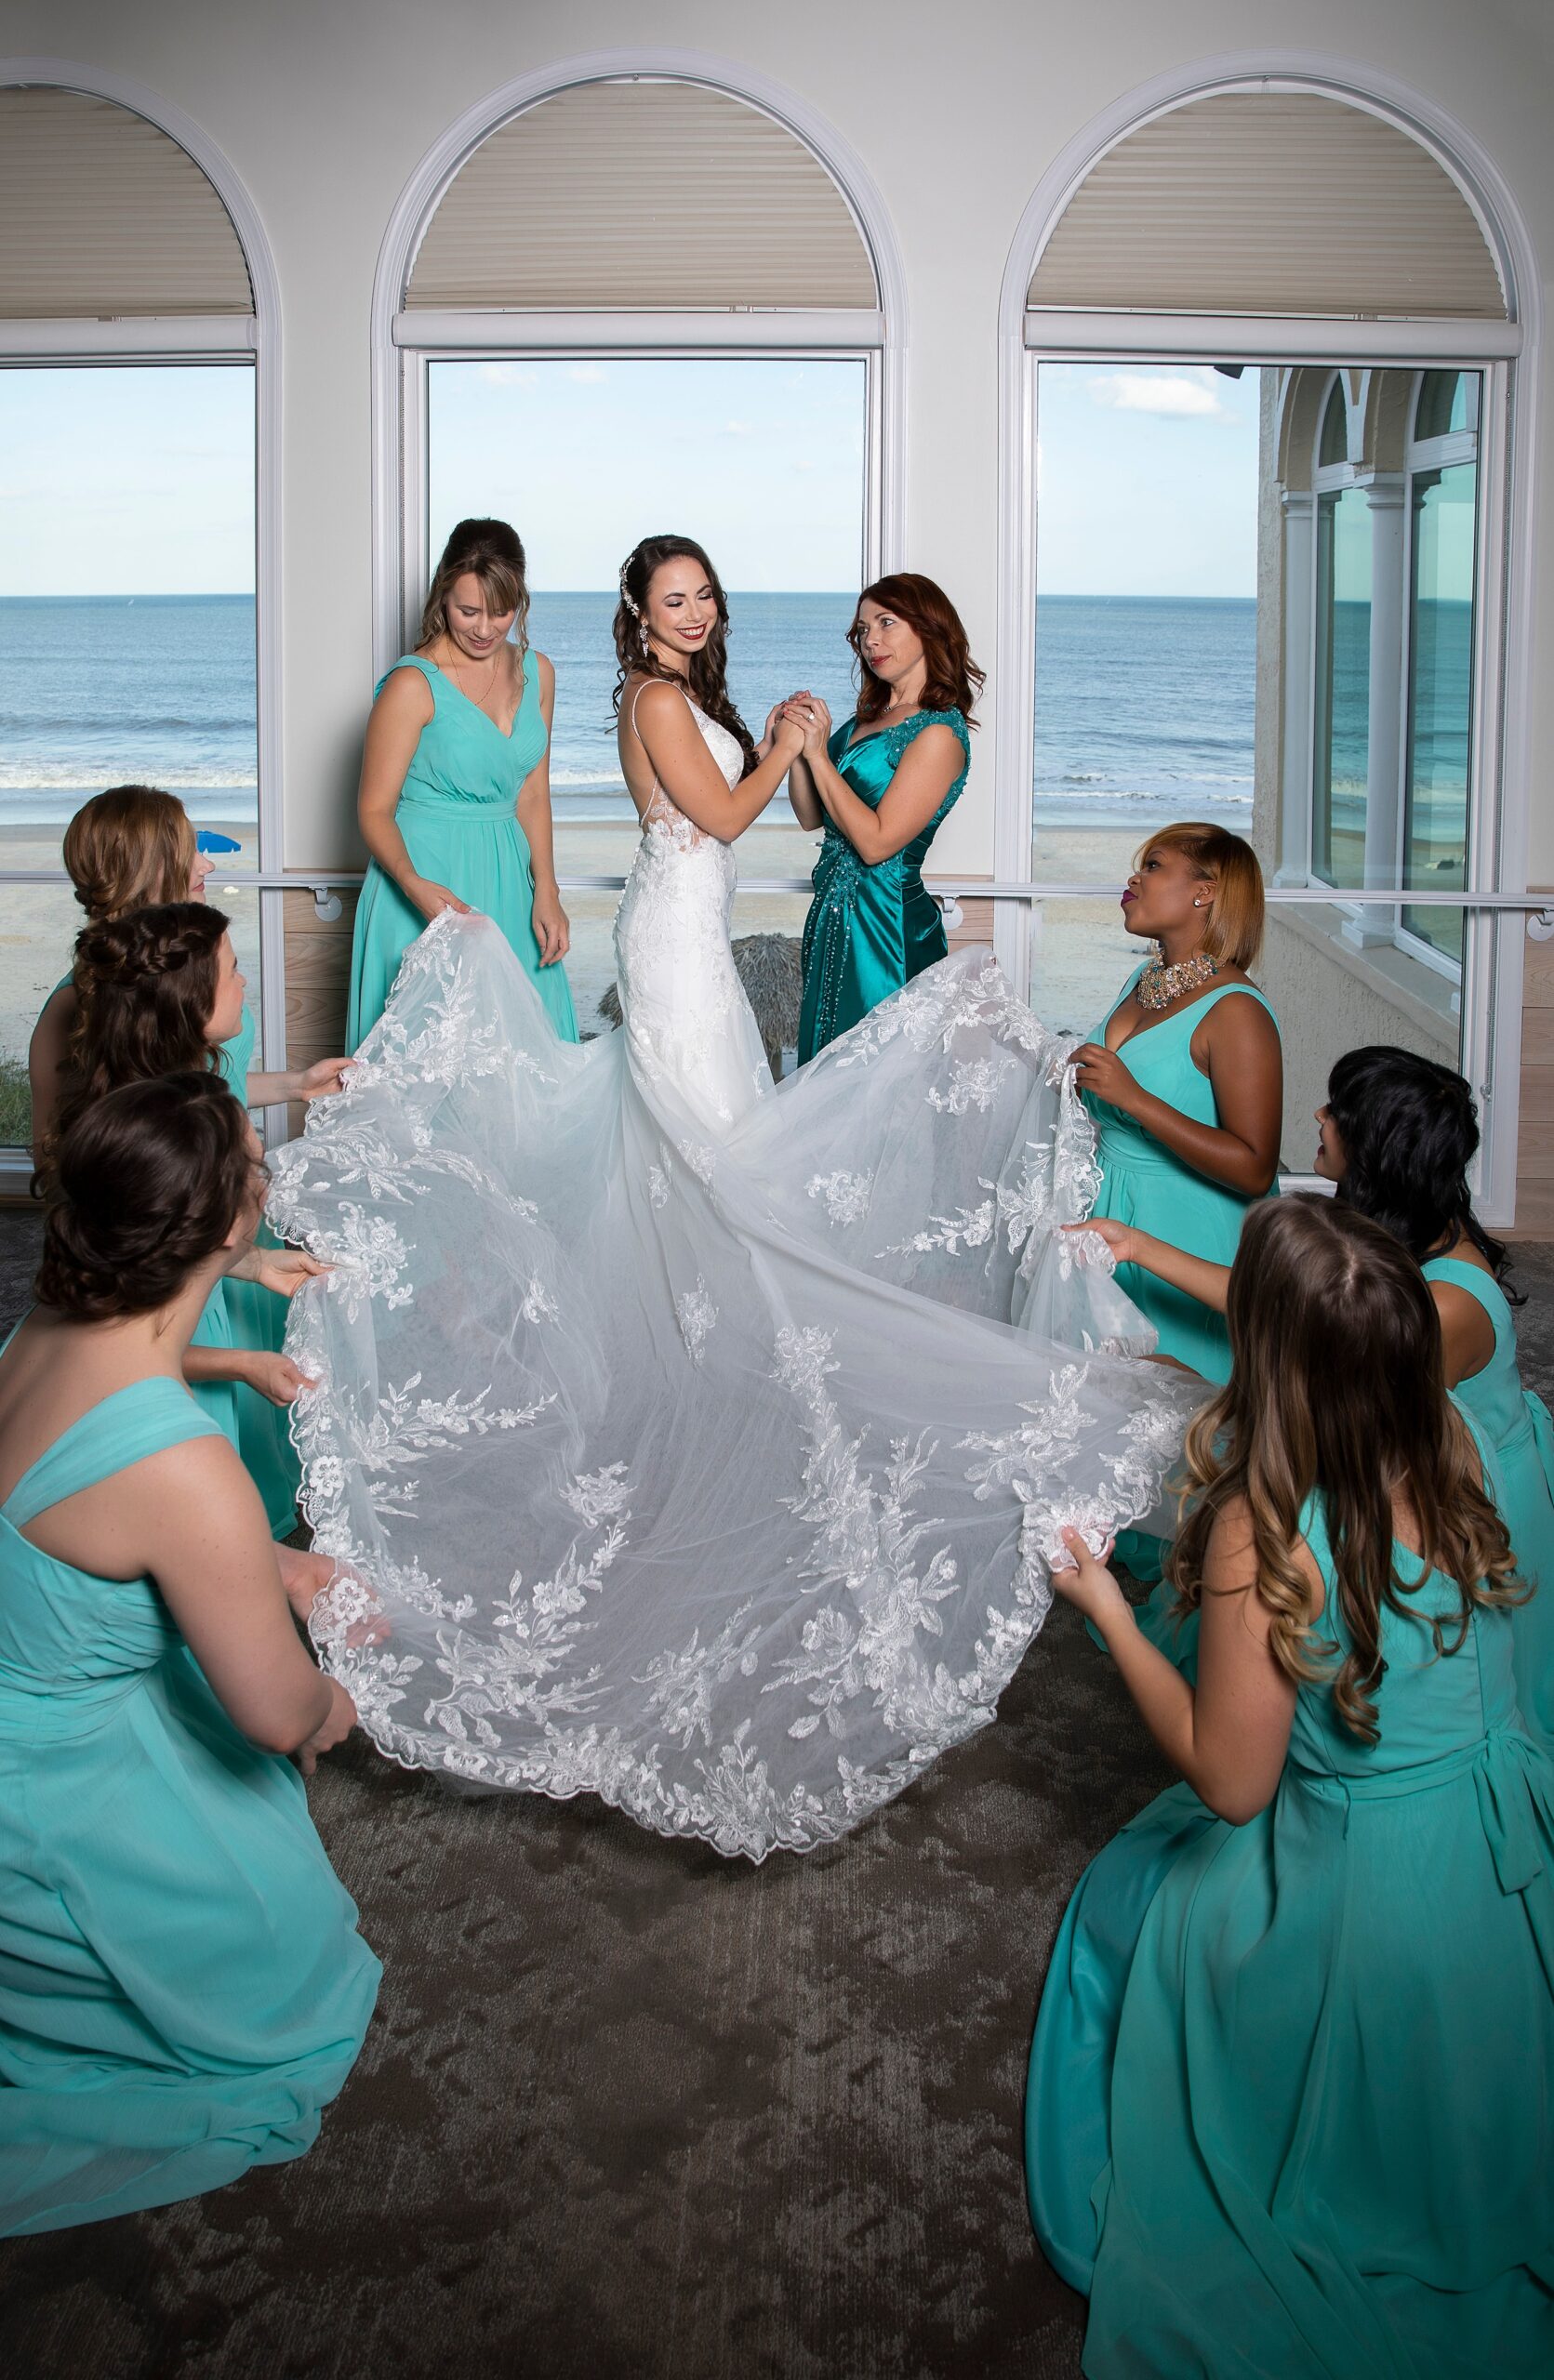 A bride shows off her beautiful dress to her bridesmaids in a beachfront suite